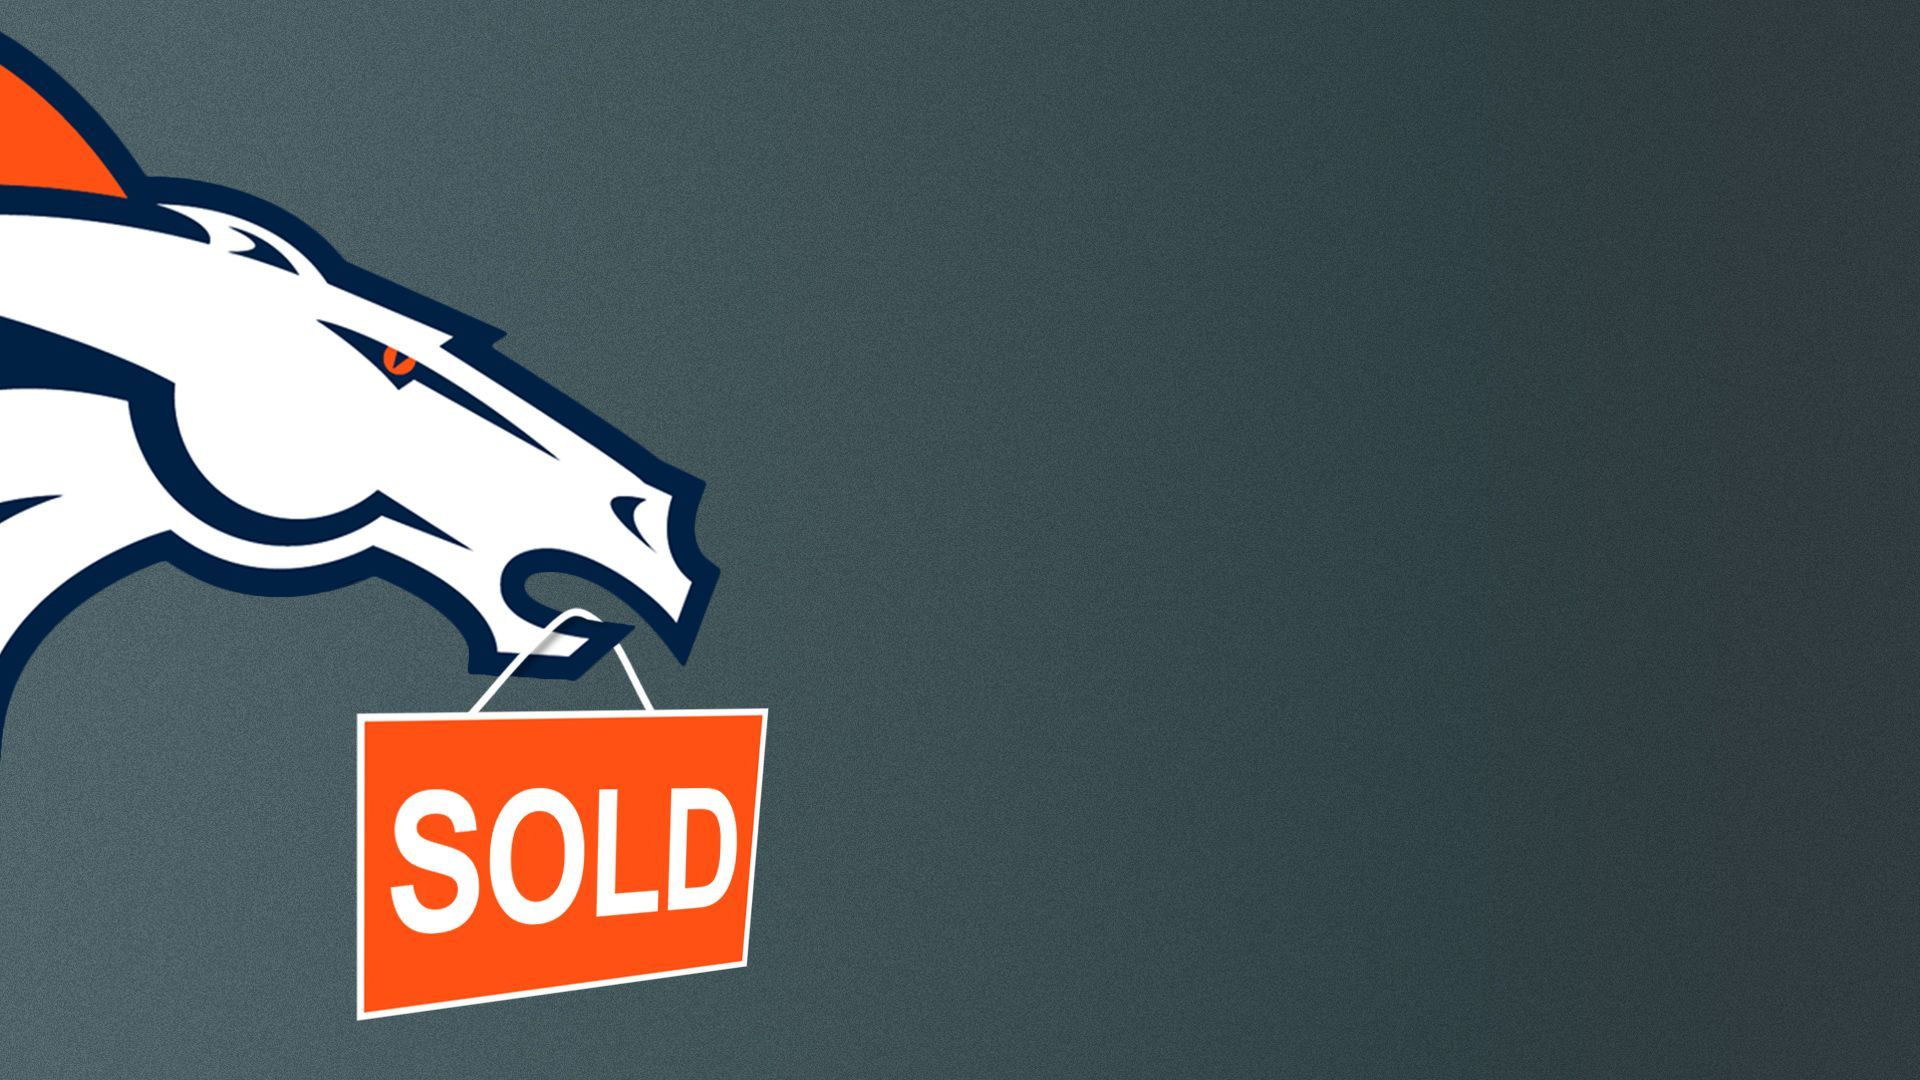 Illustration of the Denver Broncos logo holding a “Sold” sign in its mouth